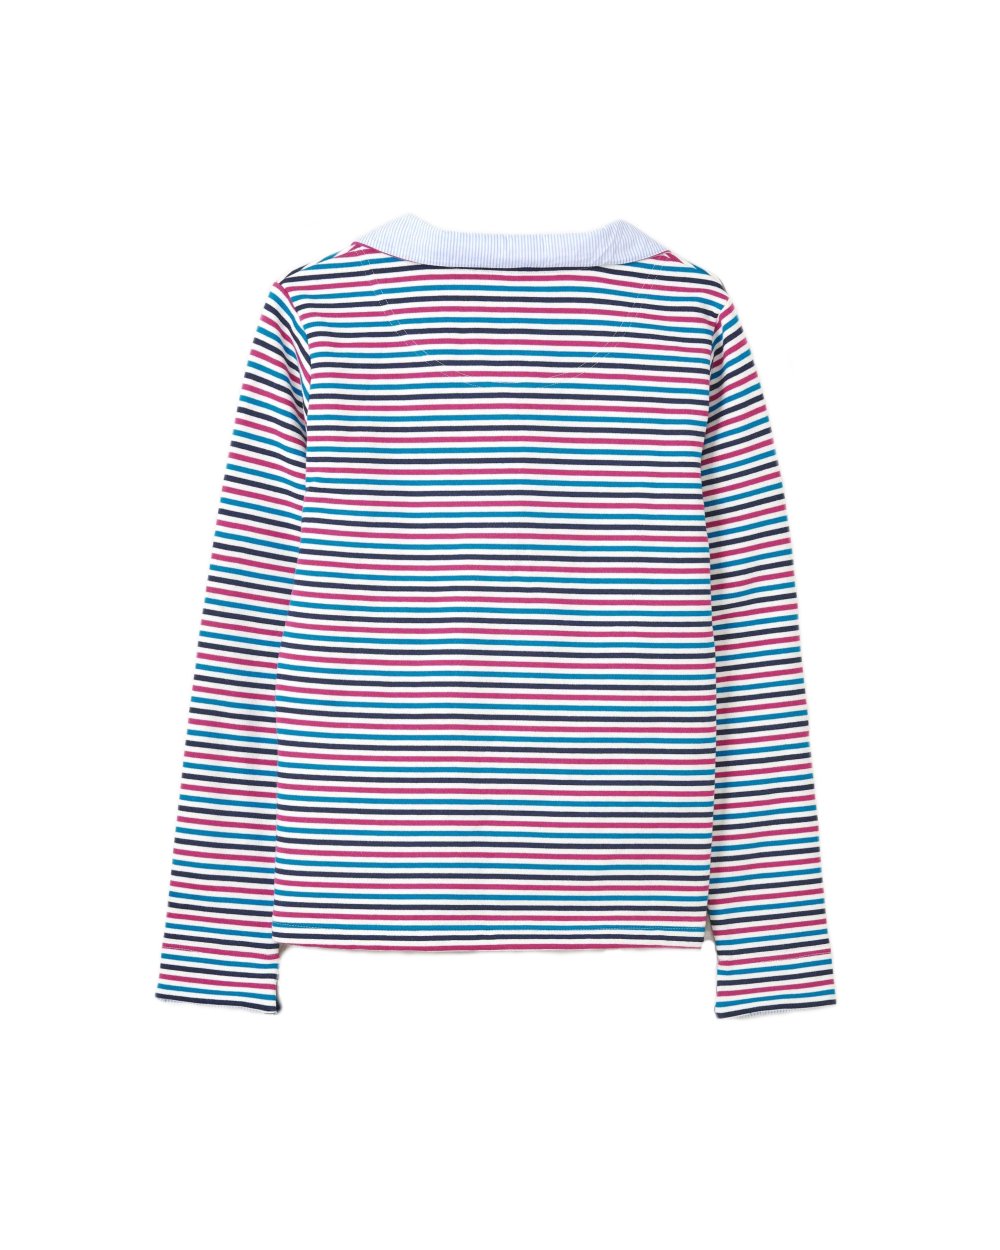 Lighthouse Ladies Haven Jersey in Berry/Teal Stripe 